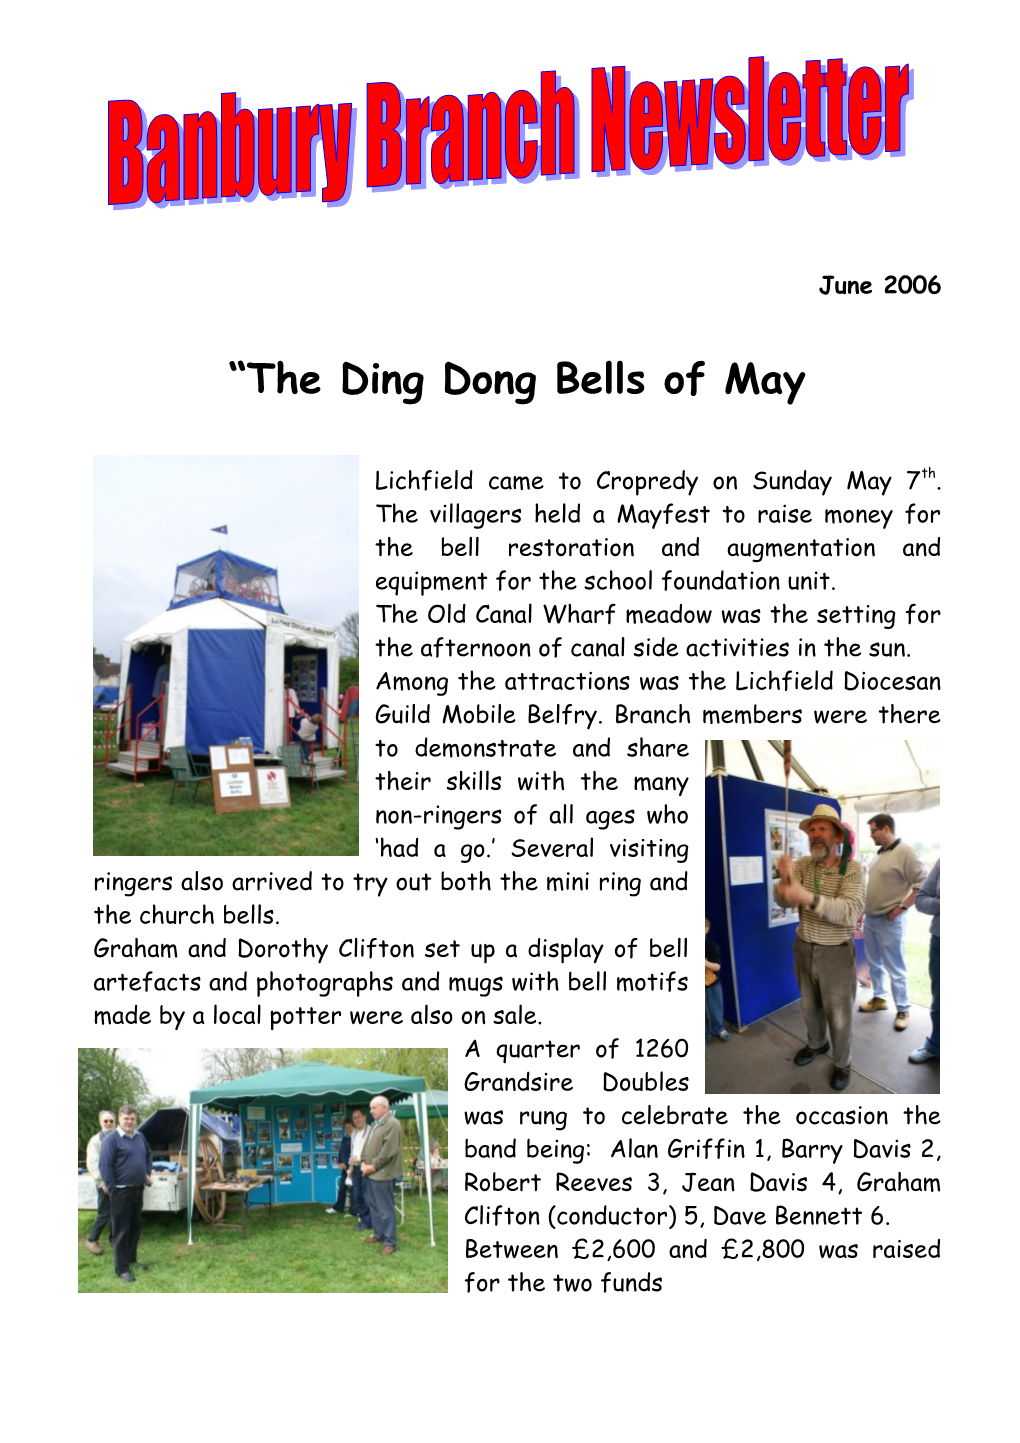 The Ding Dong Bells of May